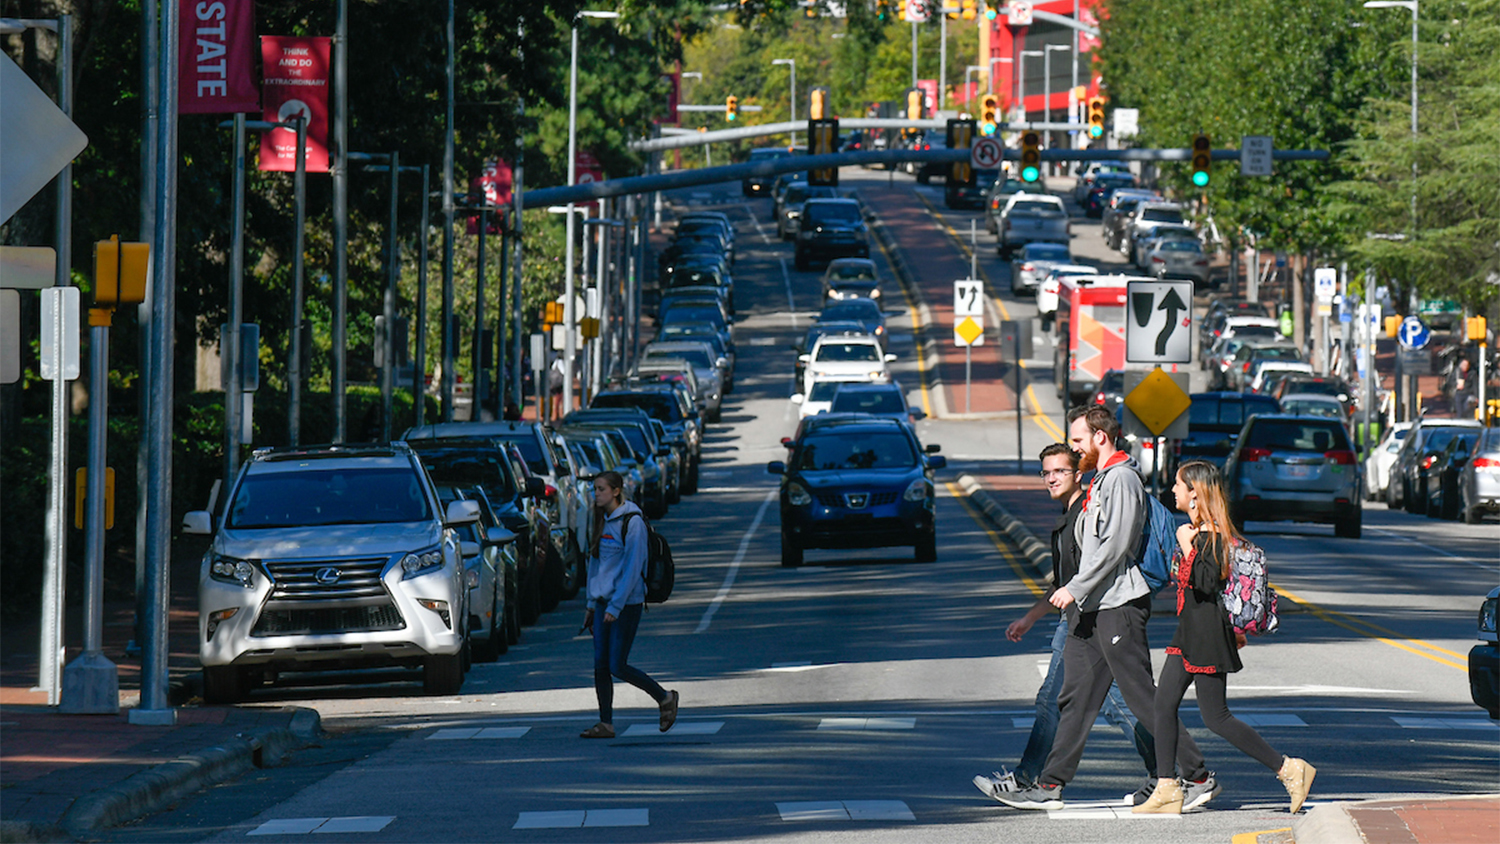 Students use a cross walk to cross Hillsborough Street, with several cars in both directions in the background